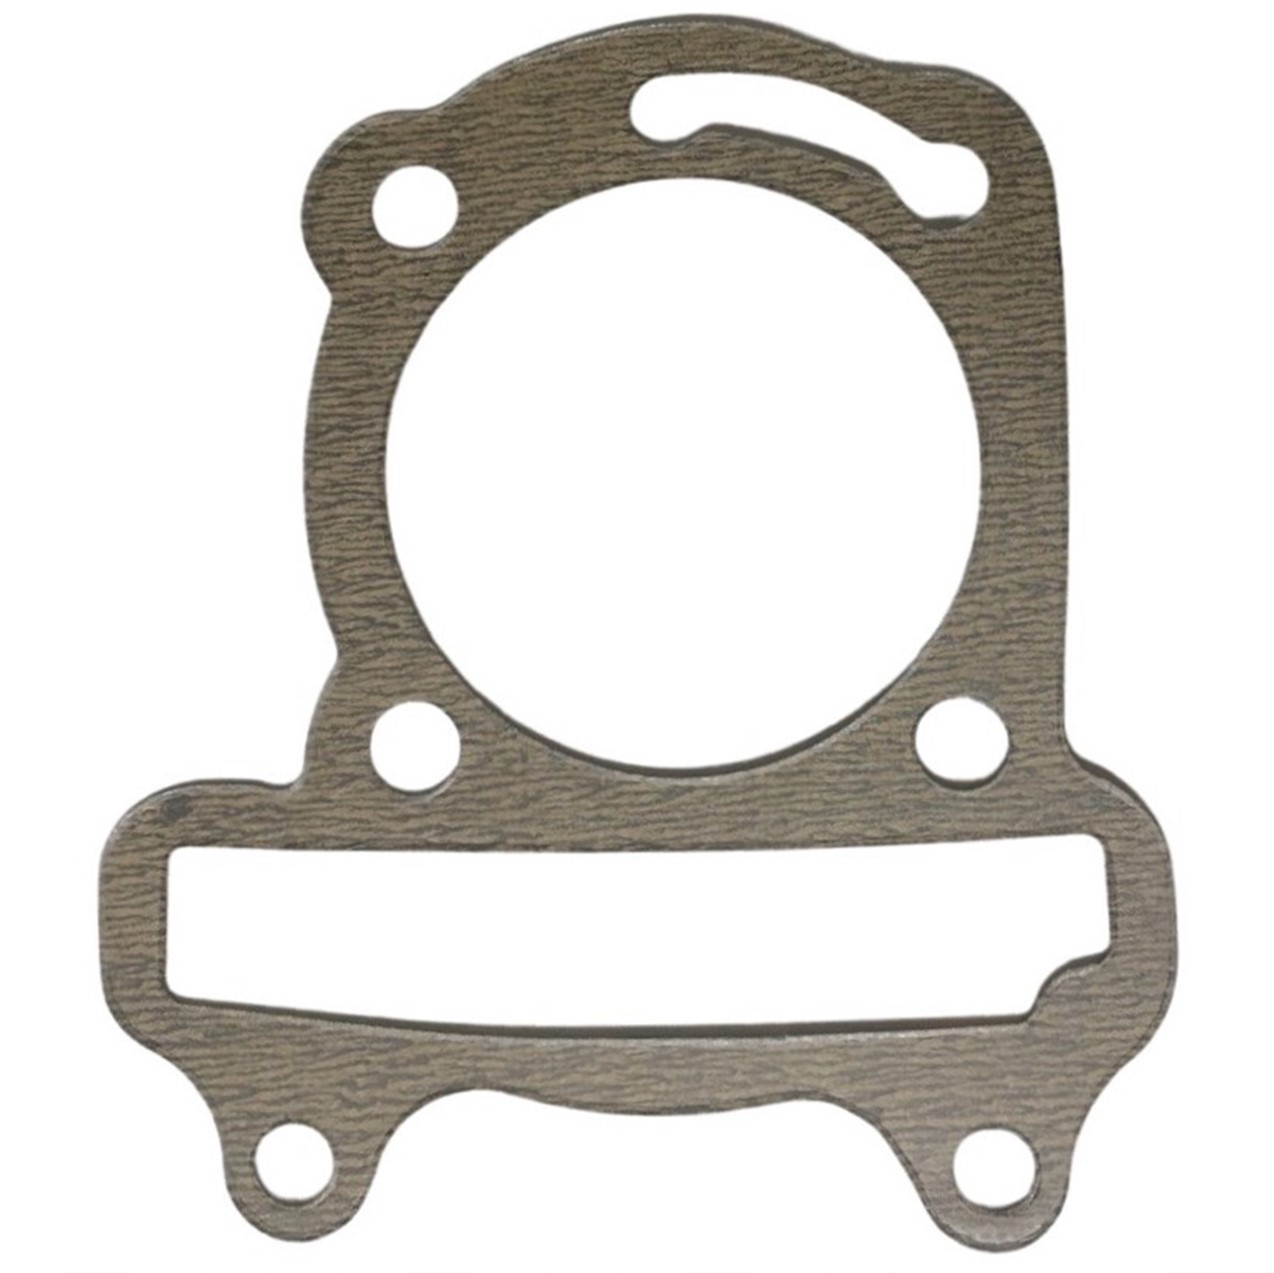 Cylinder Base Gasket Fits GY6-50 to 80cc QMB139 ATVs & Scooters - Click Image to Close